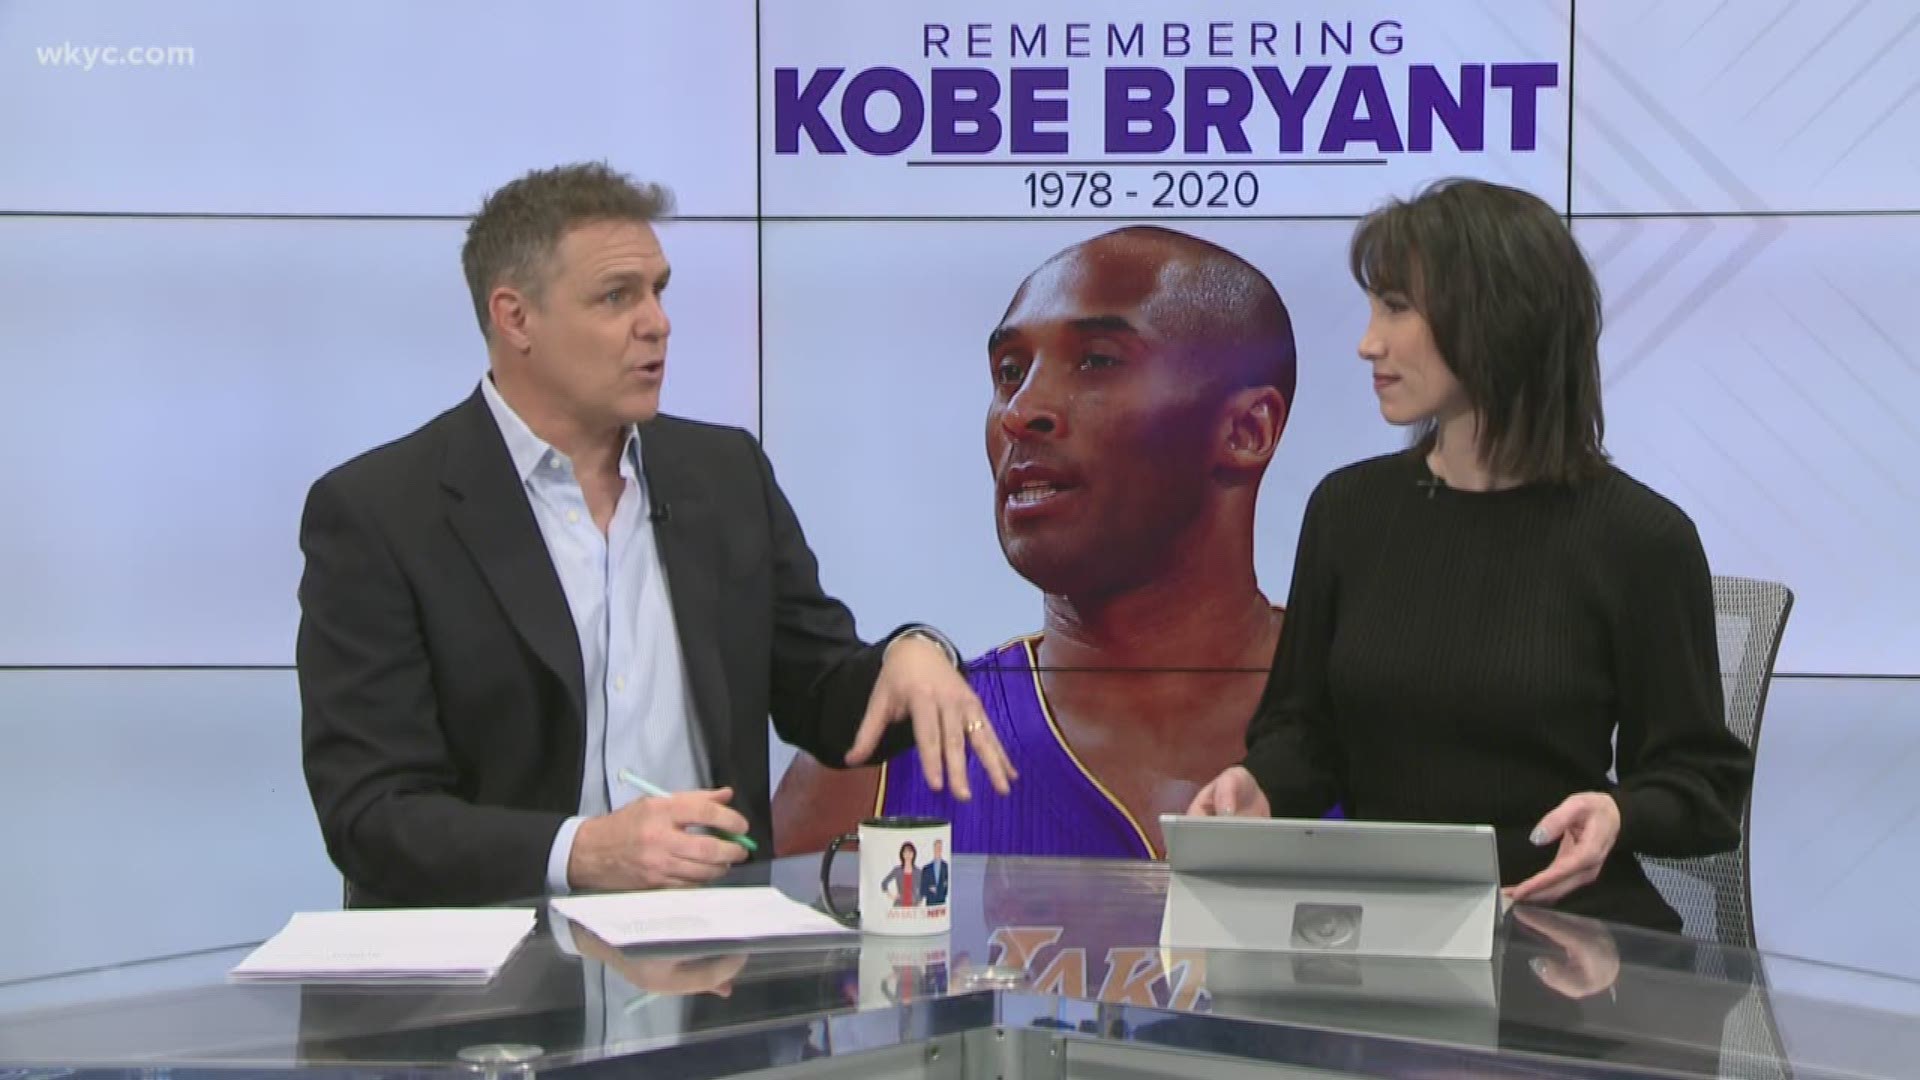 "If you met him, you'd never forget him." Jay Crawford reflects on the first time he met Kobe Bryant during his time with ESPN.